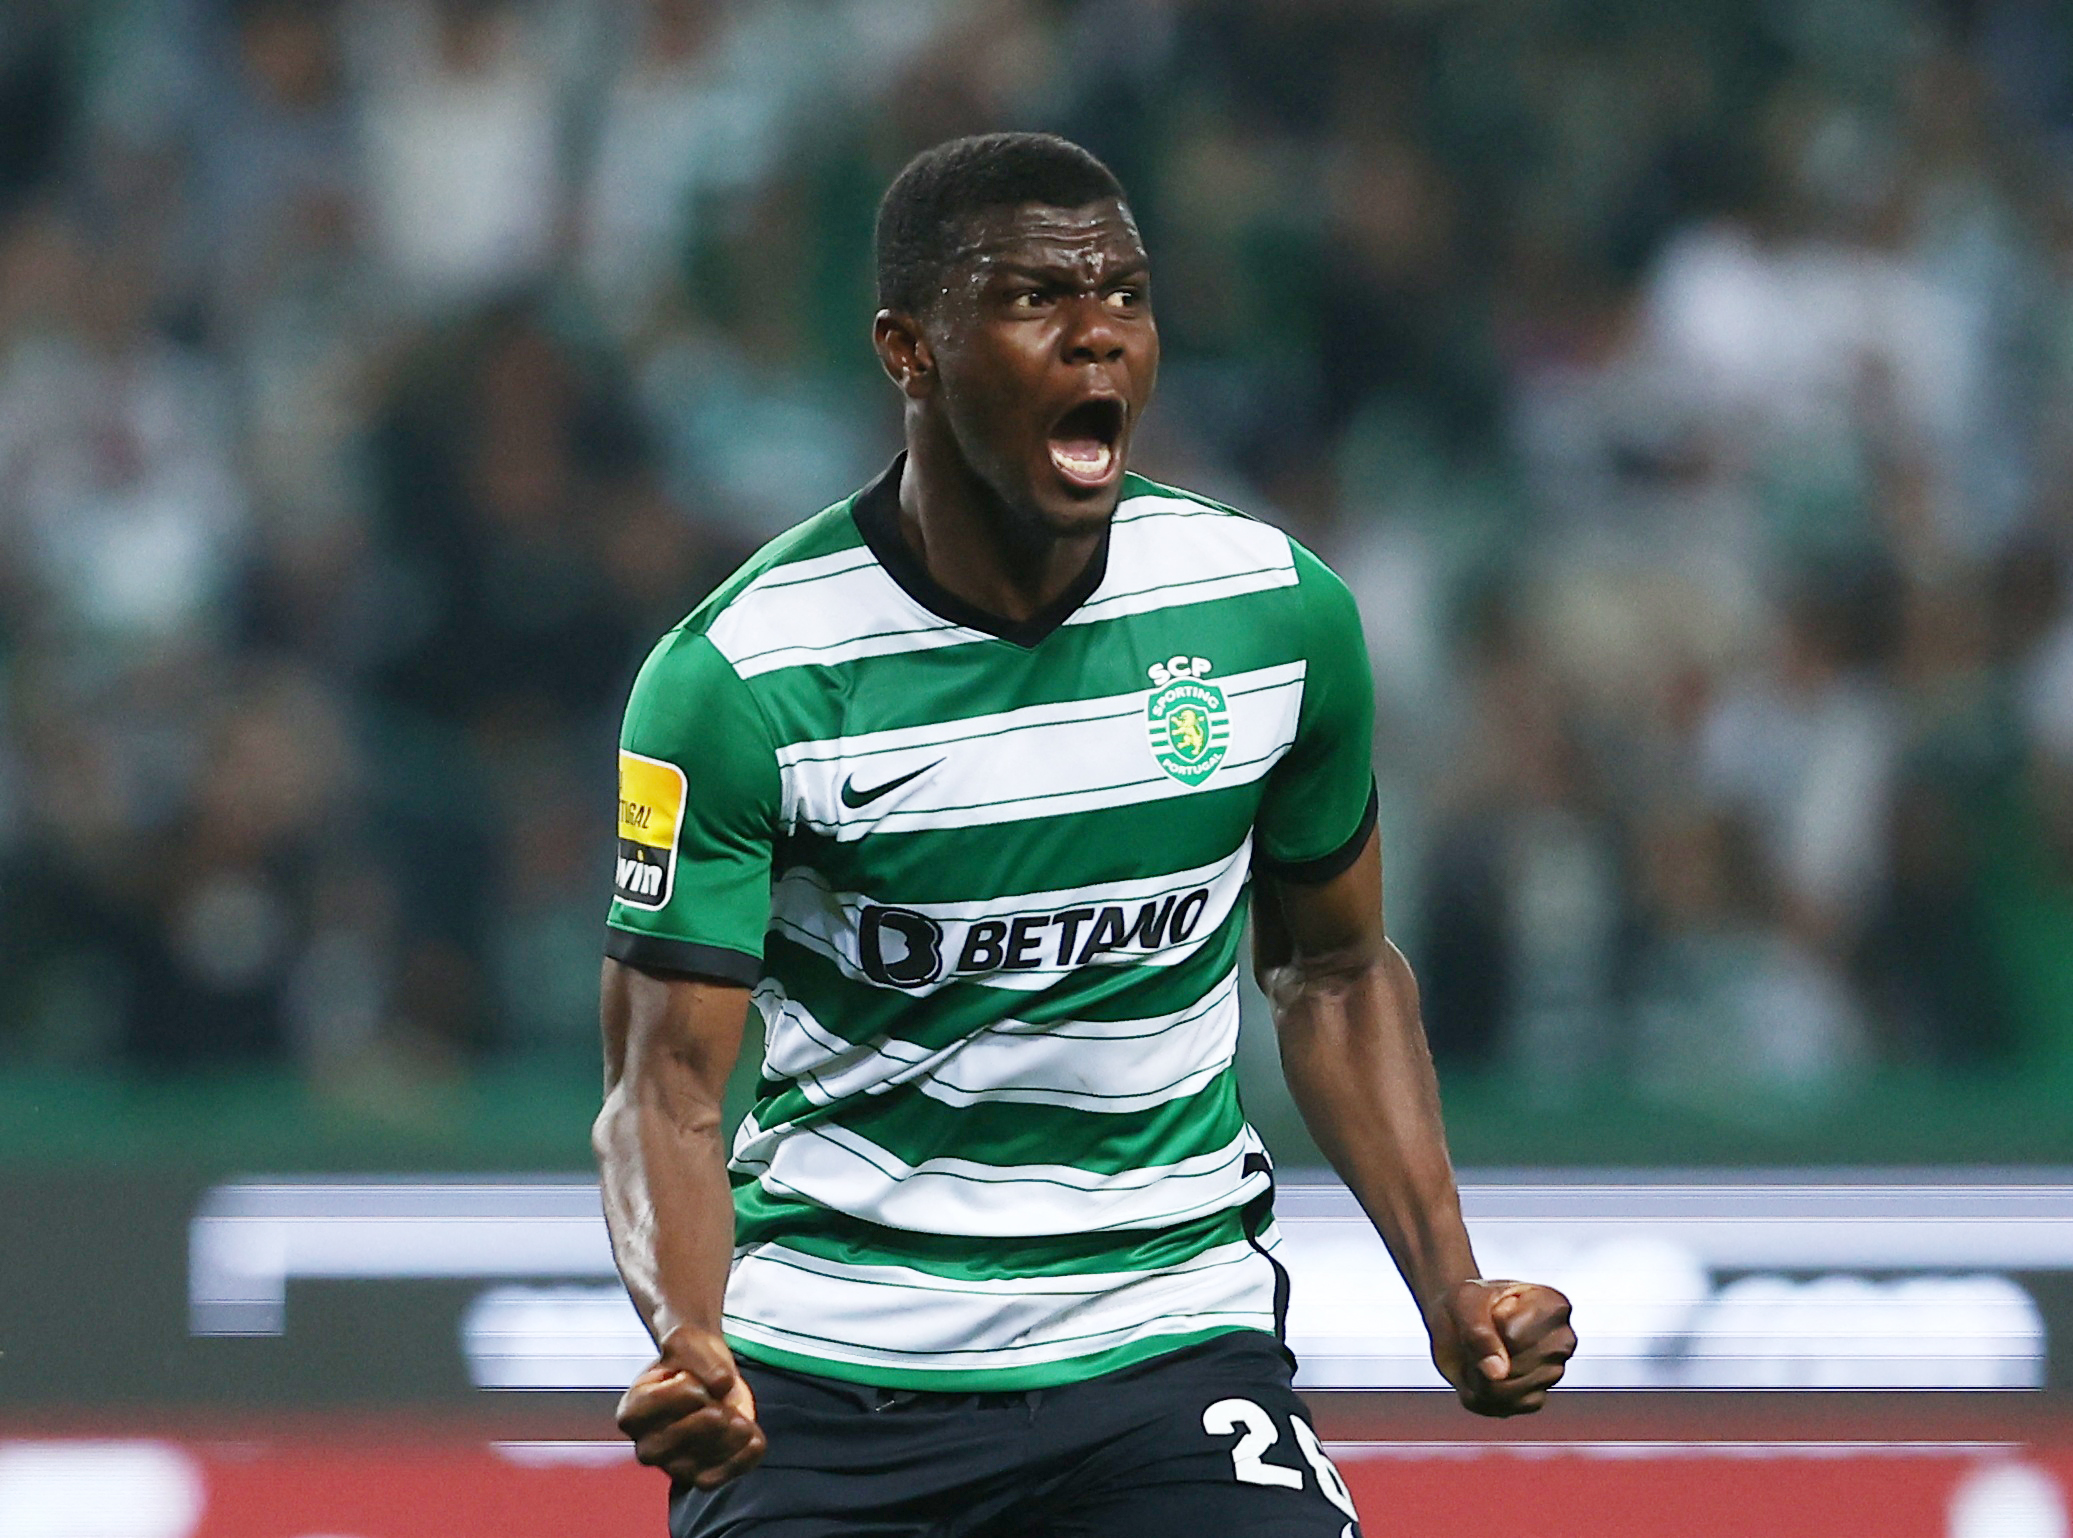 Napoli wish to onboard a rock-solid defender next summer and have taken an interest in one of the most intriguing ones, Sporting CP’s Ousmane Diomande.